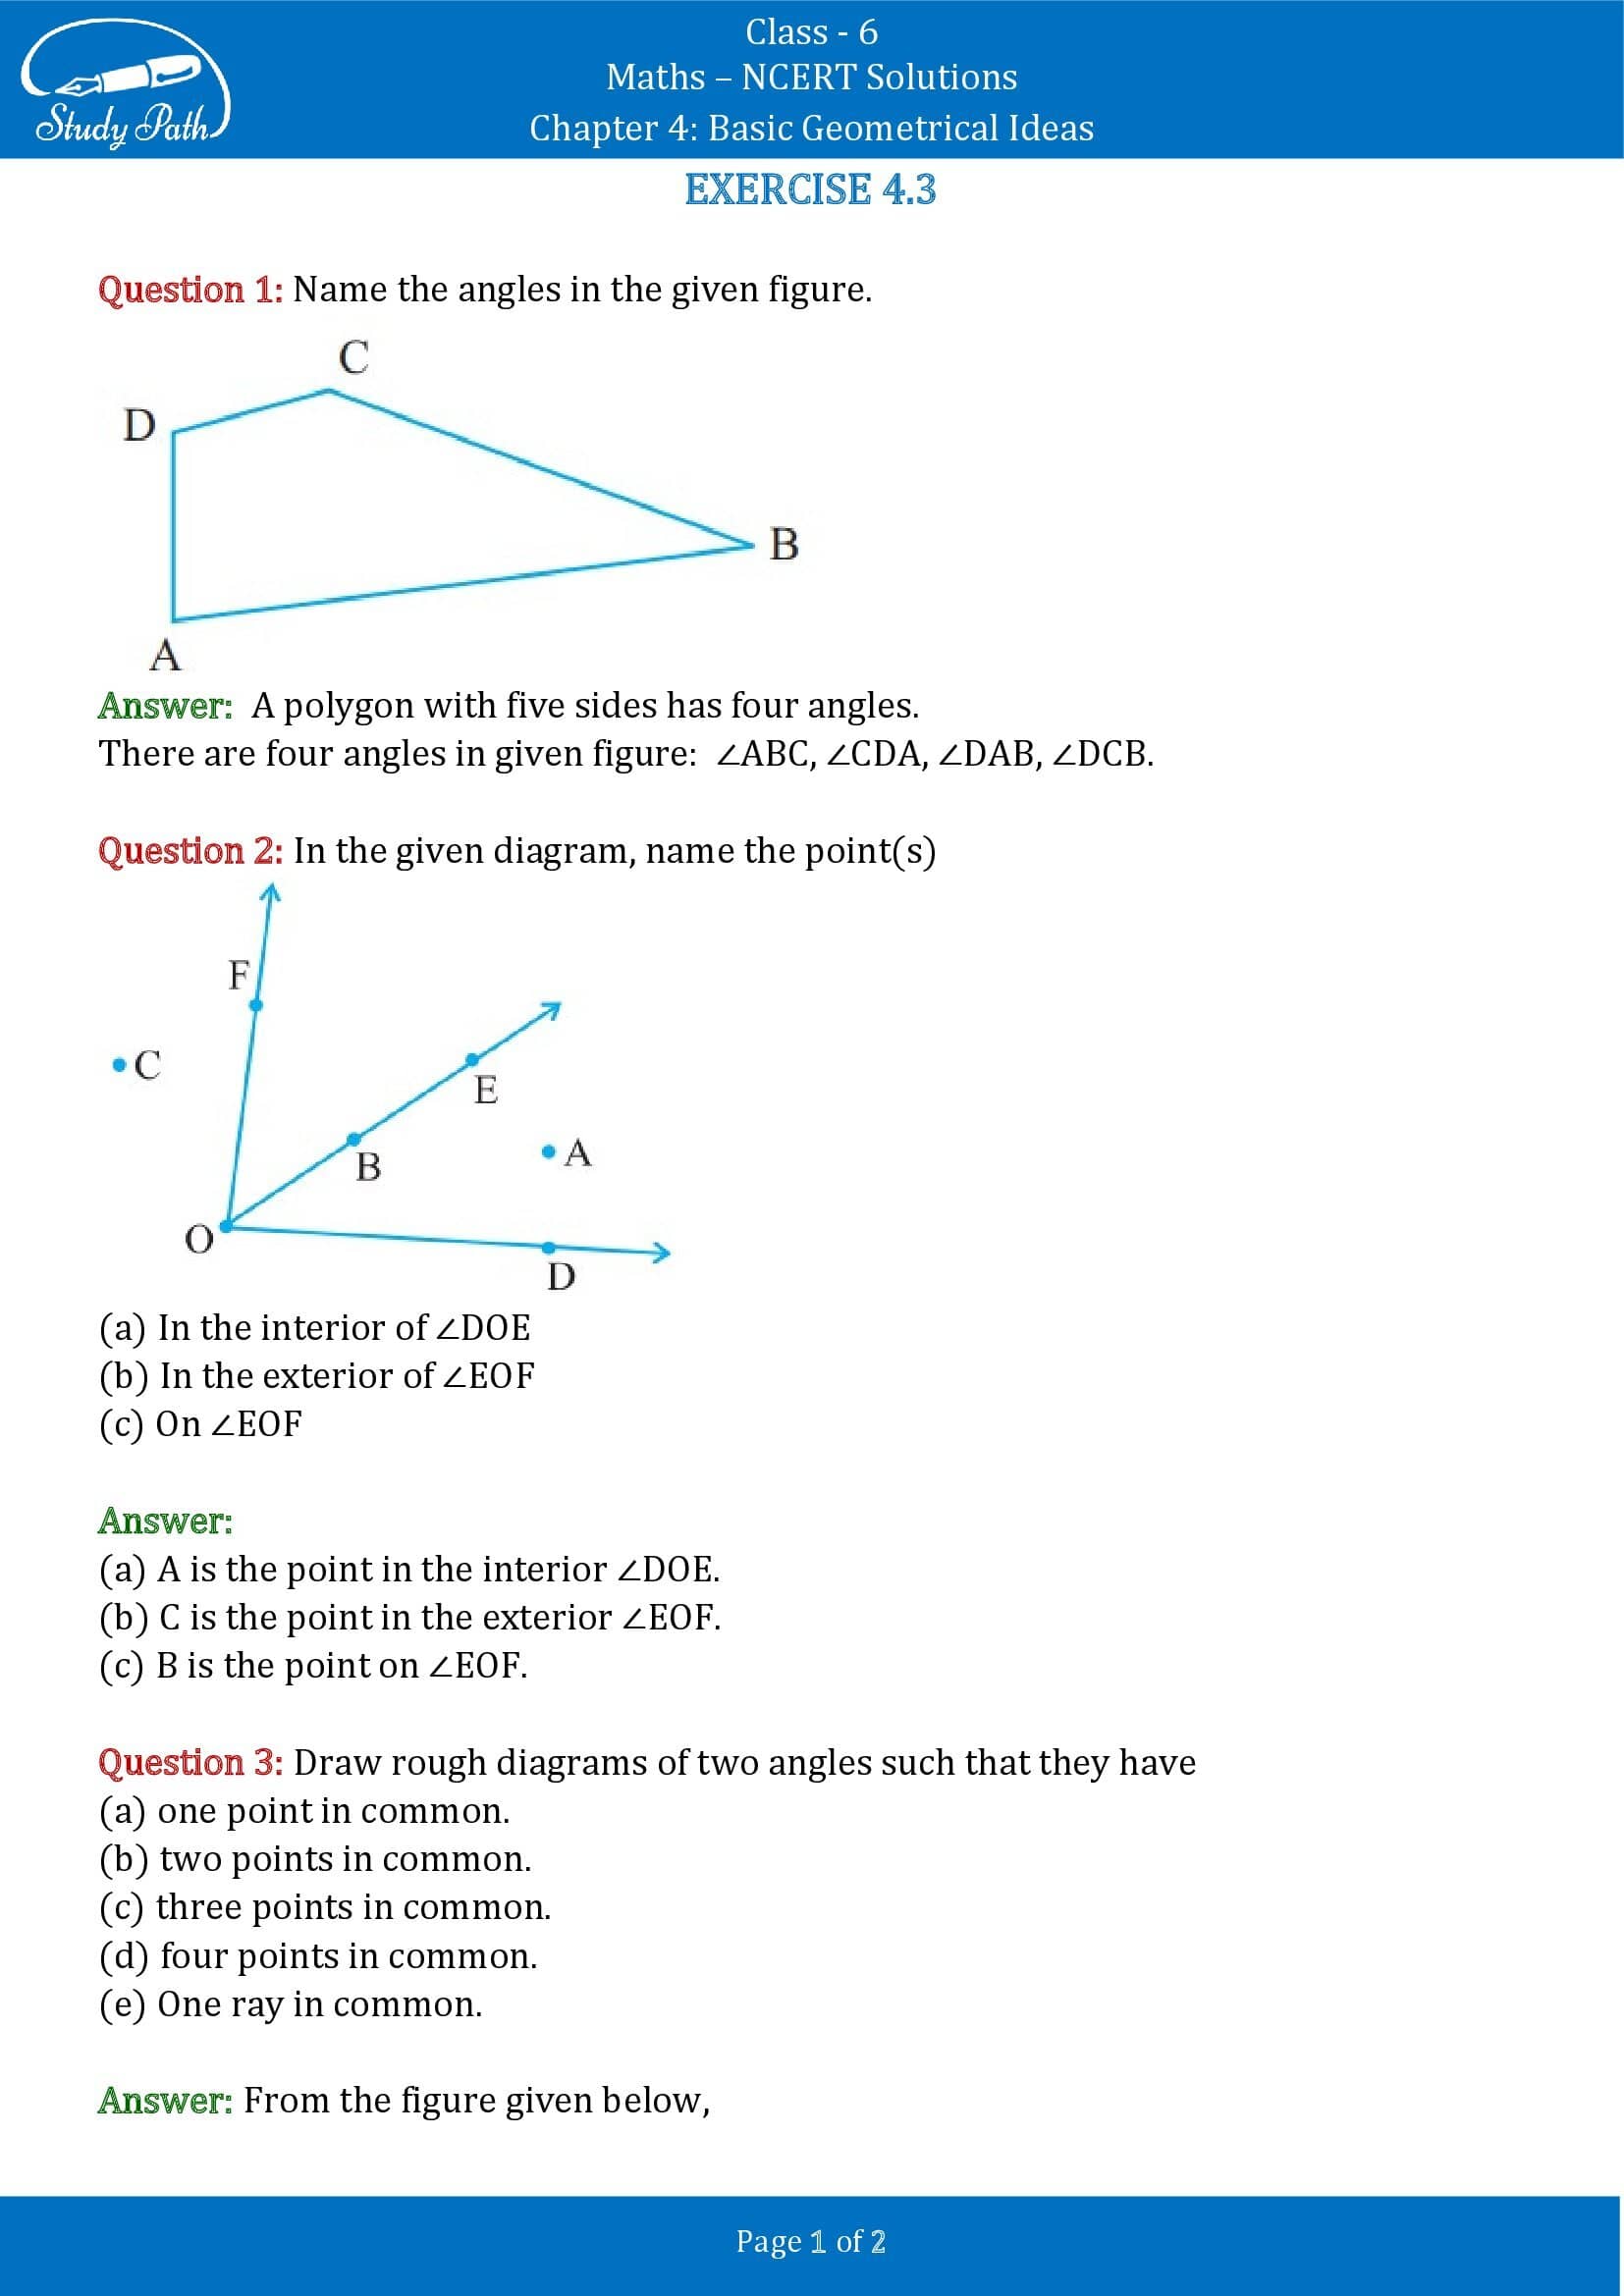 NCERT Solutions for Class 6 Maths Chapter 4 Basic Geometrical Ideas Exercise 4.3 00001